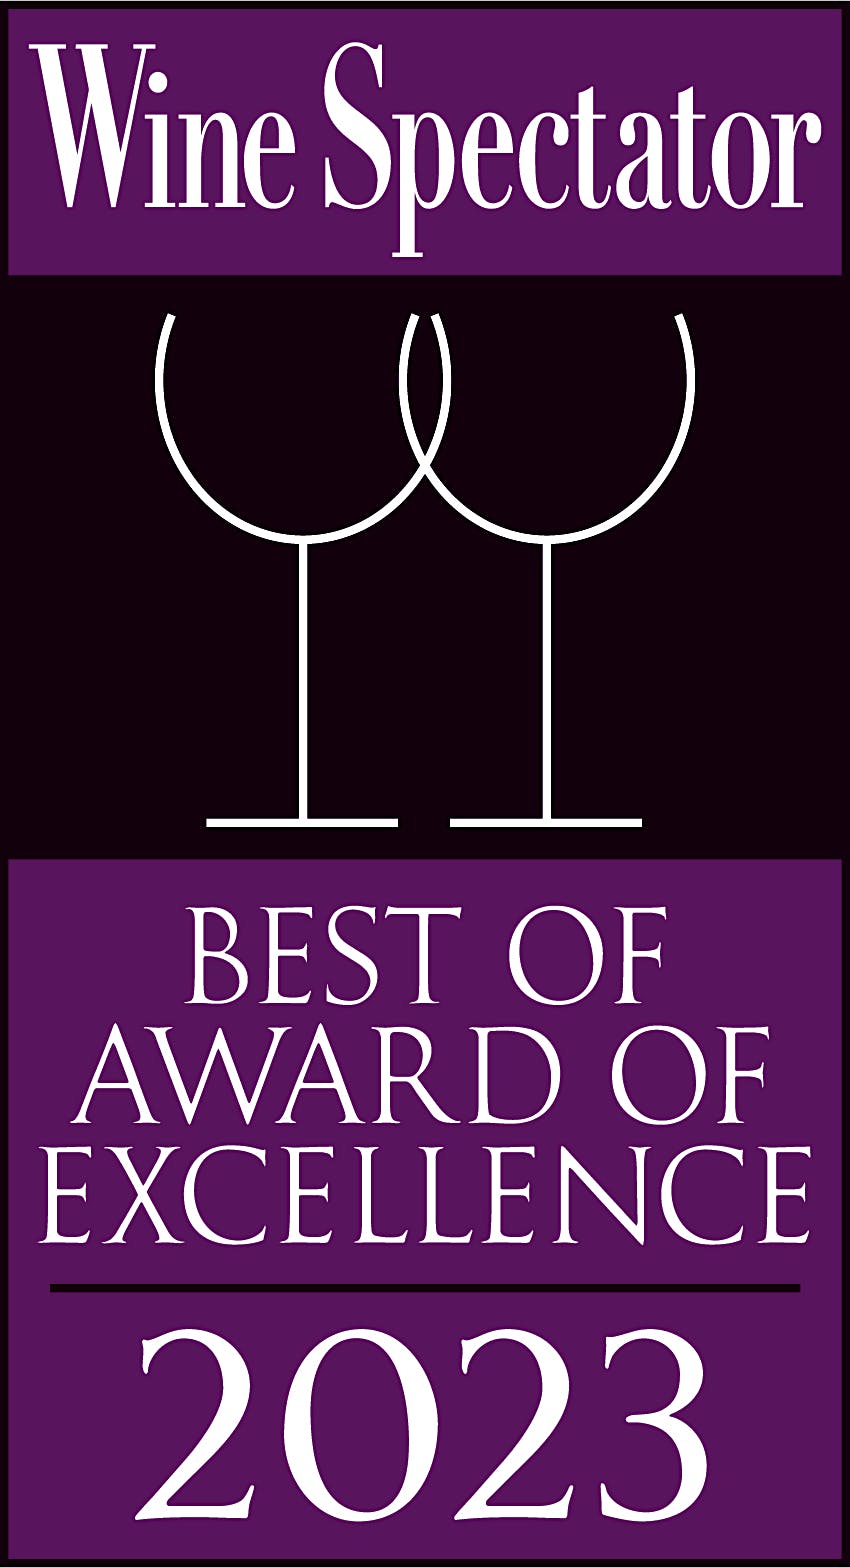 Wine Spectator Best of Award of Excellence 2023